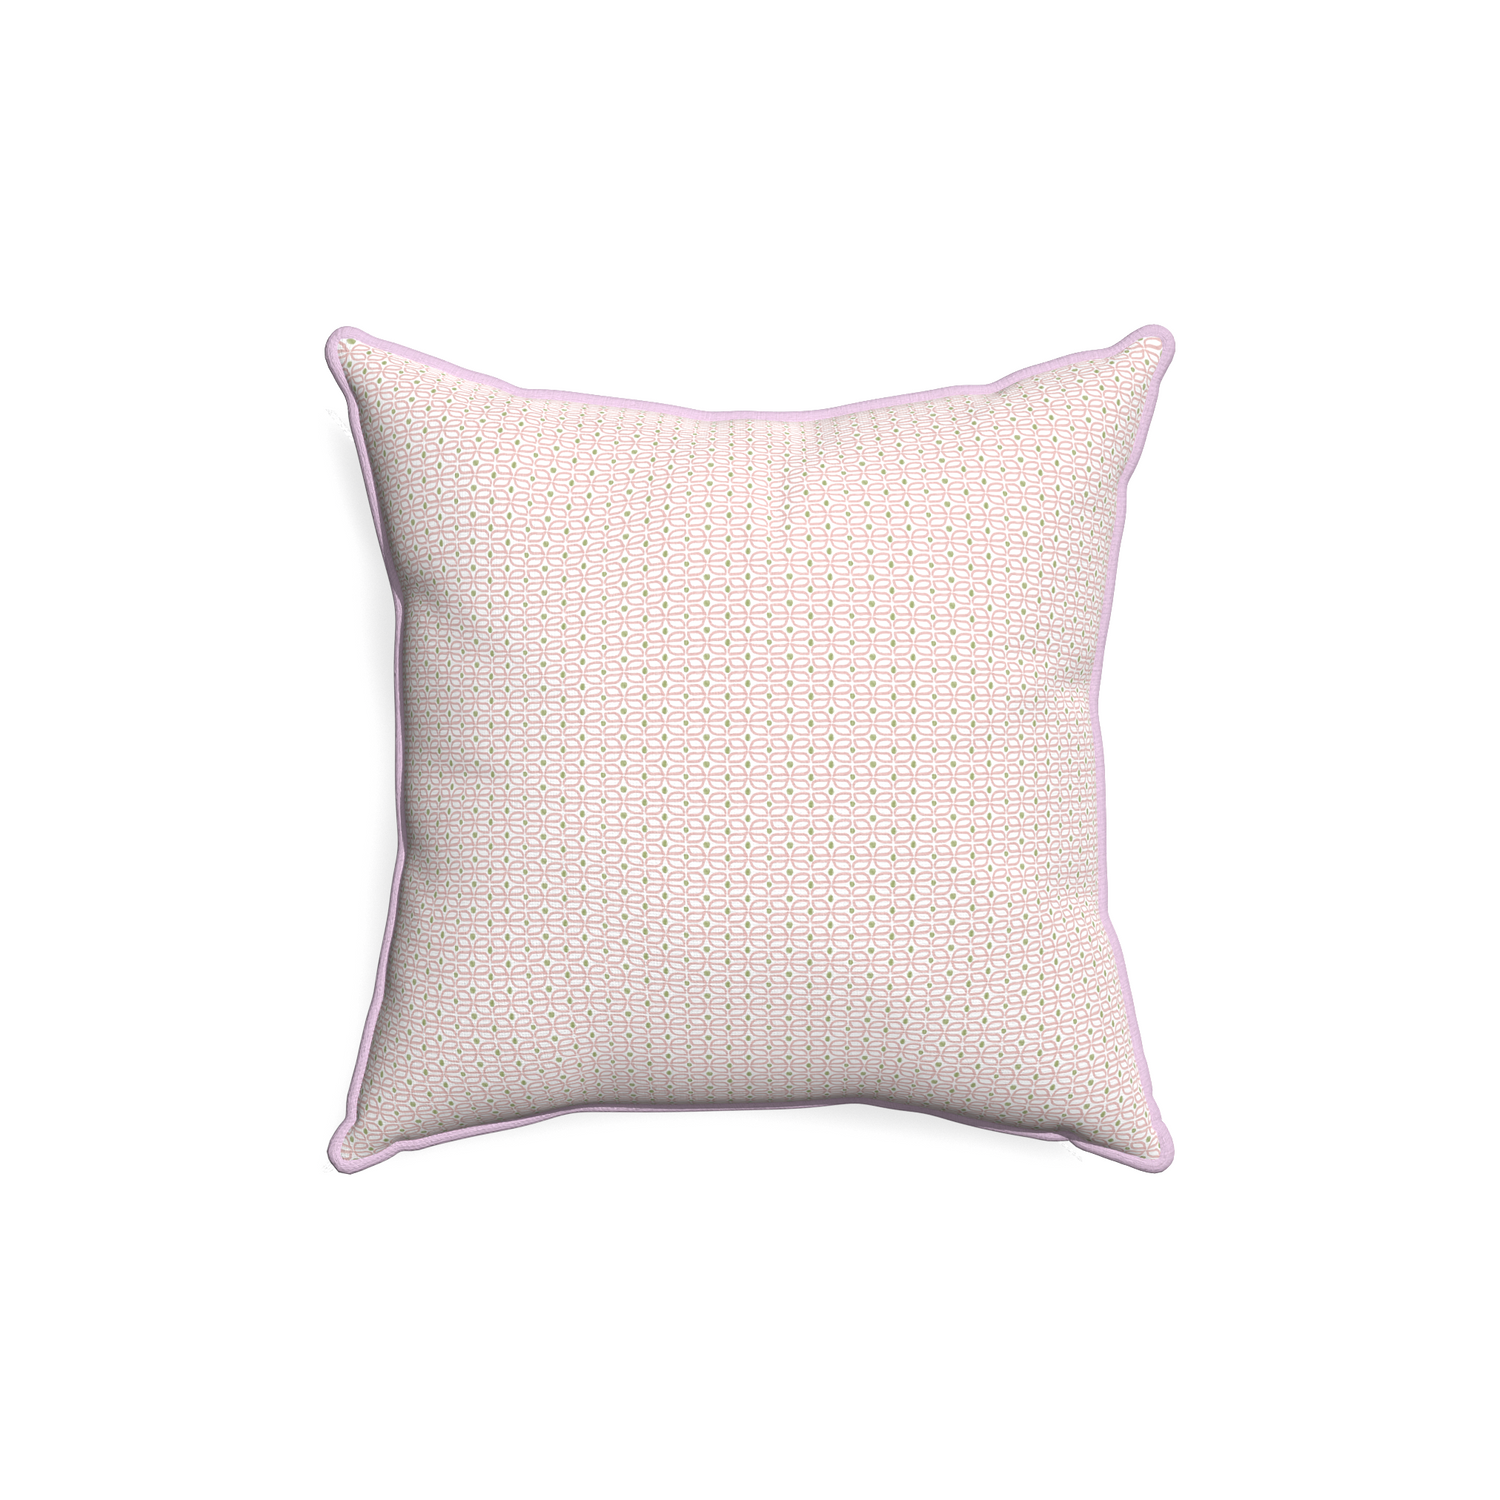 18-square loomi pink custom pillow with l piping on white background